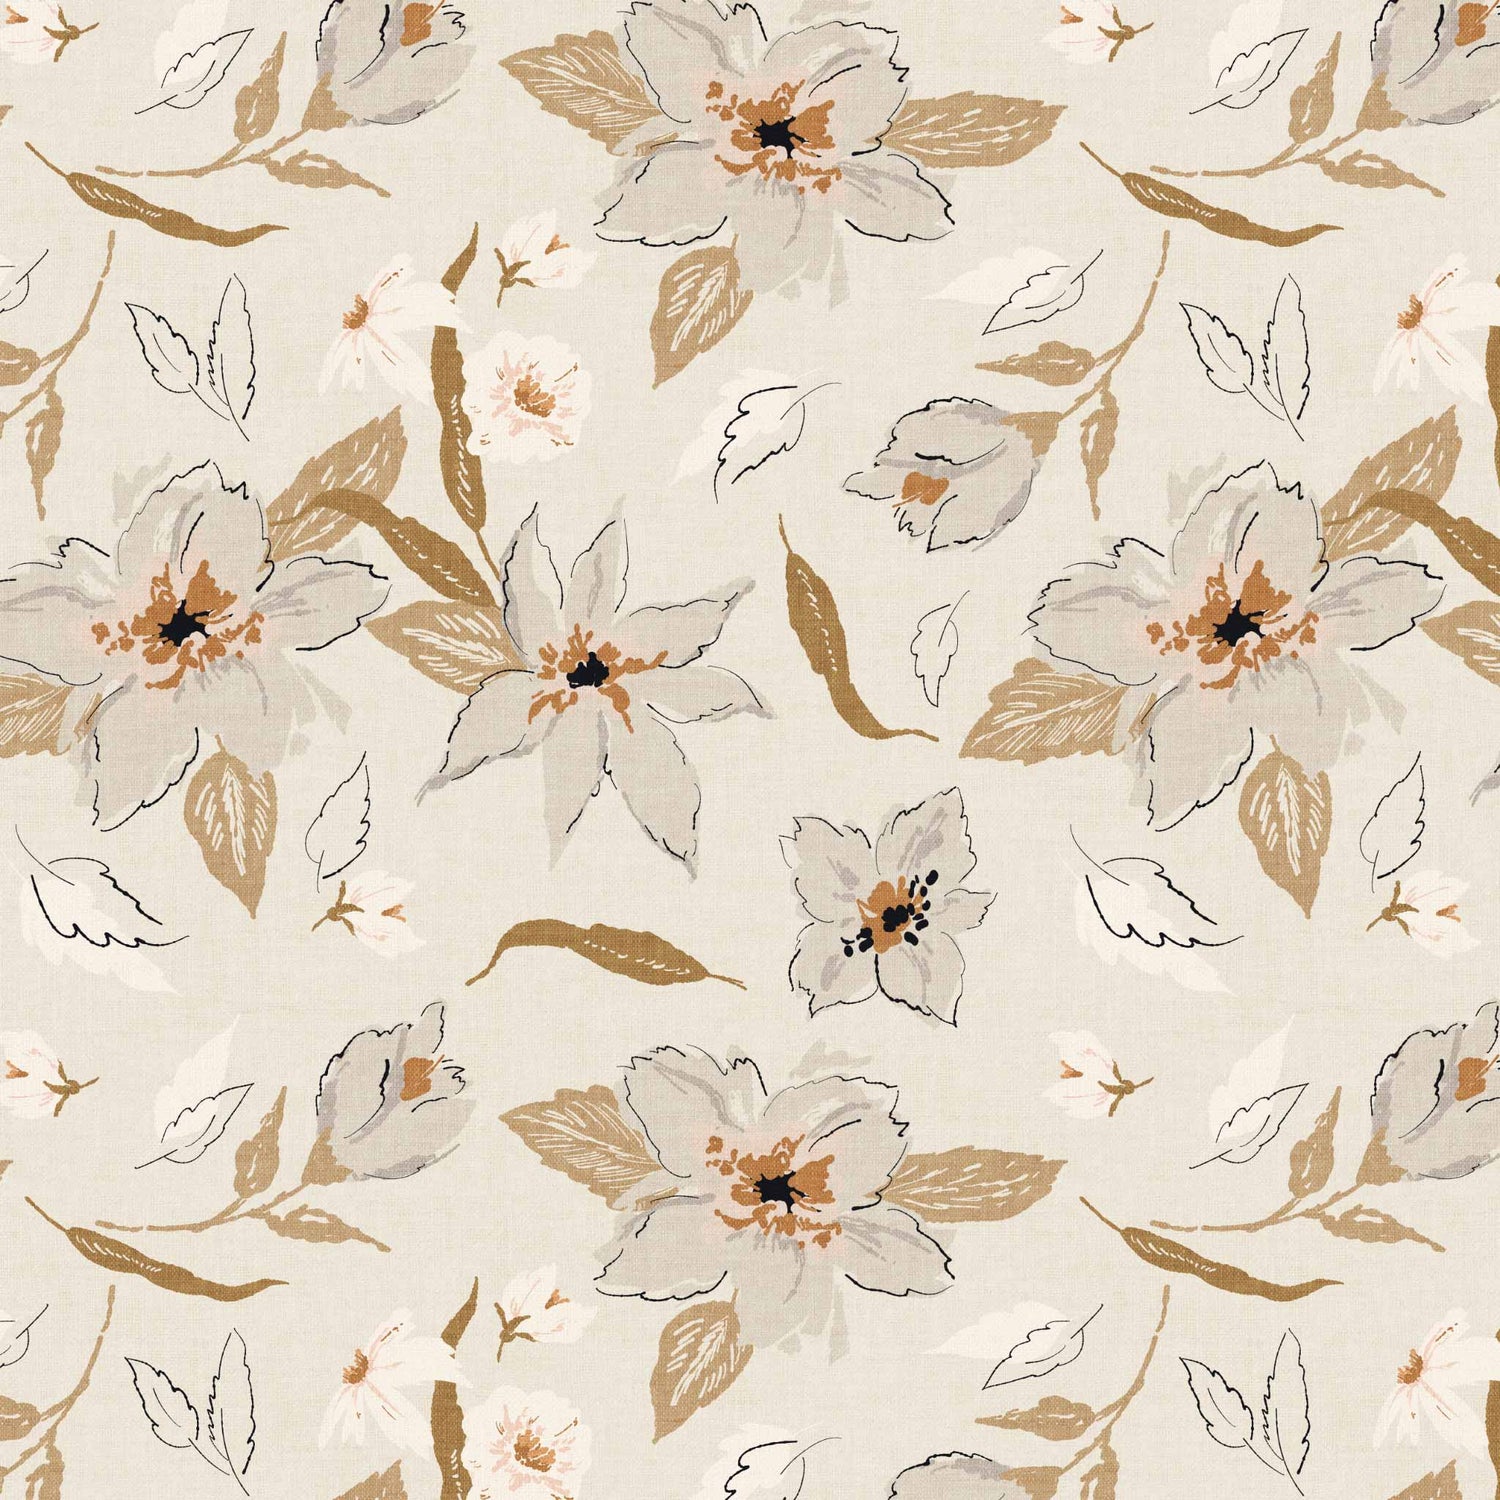 Bring a splash of natural beauty to your walls with this stunning Freehand Florals Wallpaper. Its vibrant cream tones and gorgeously done flowers.